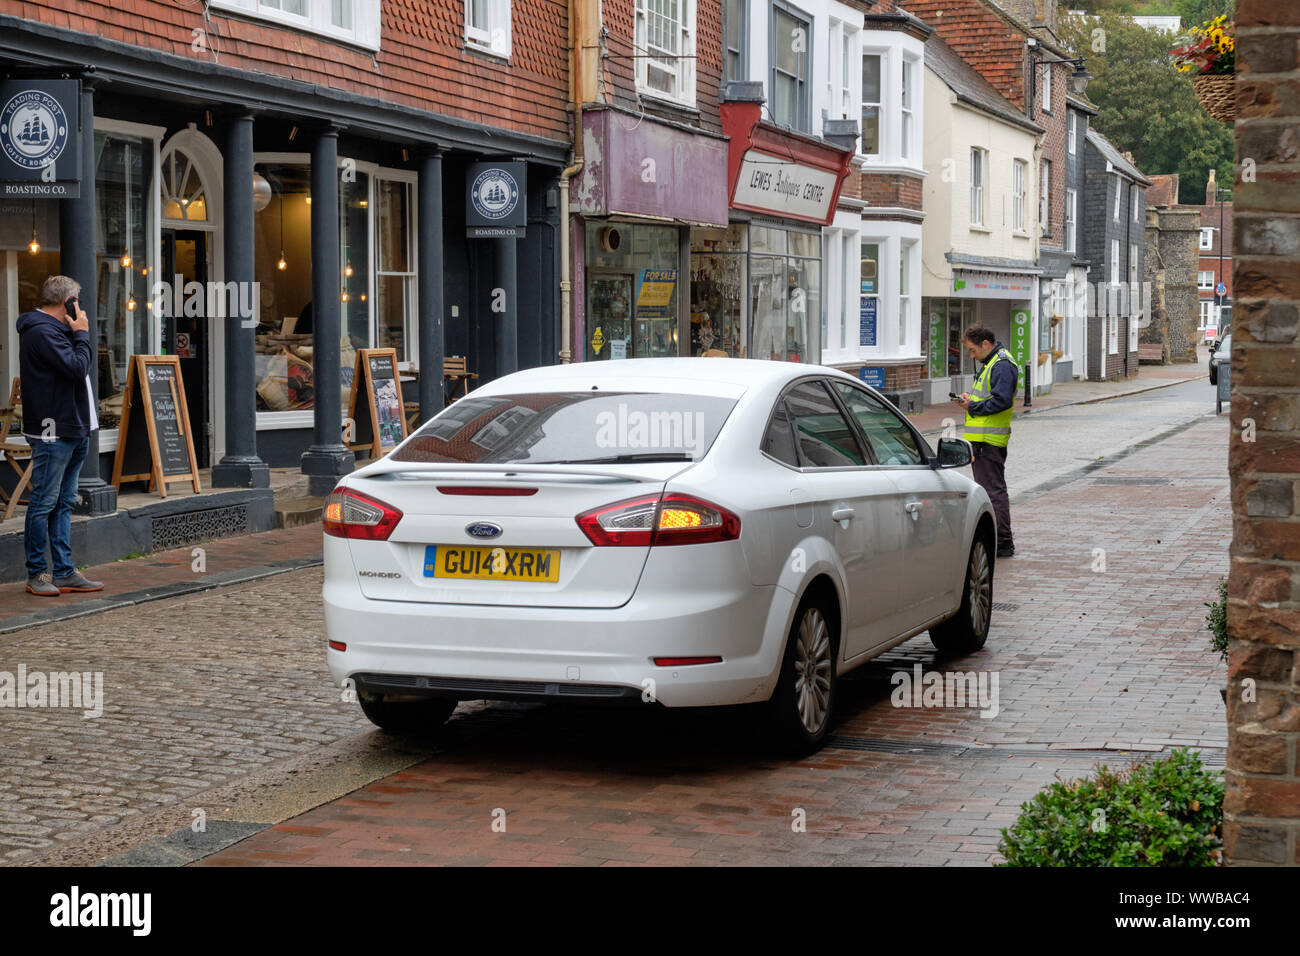 Parking enforcement officer writing a ticket to a car parked illegally in the pedestrian area of the town. Lewes, UK, September 2019 Stock Photo